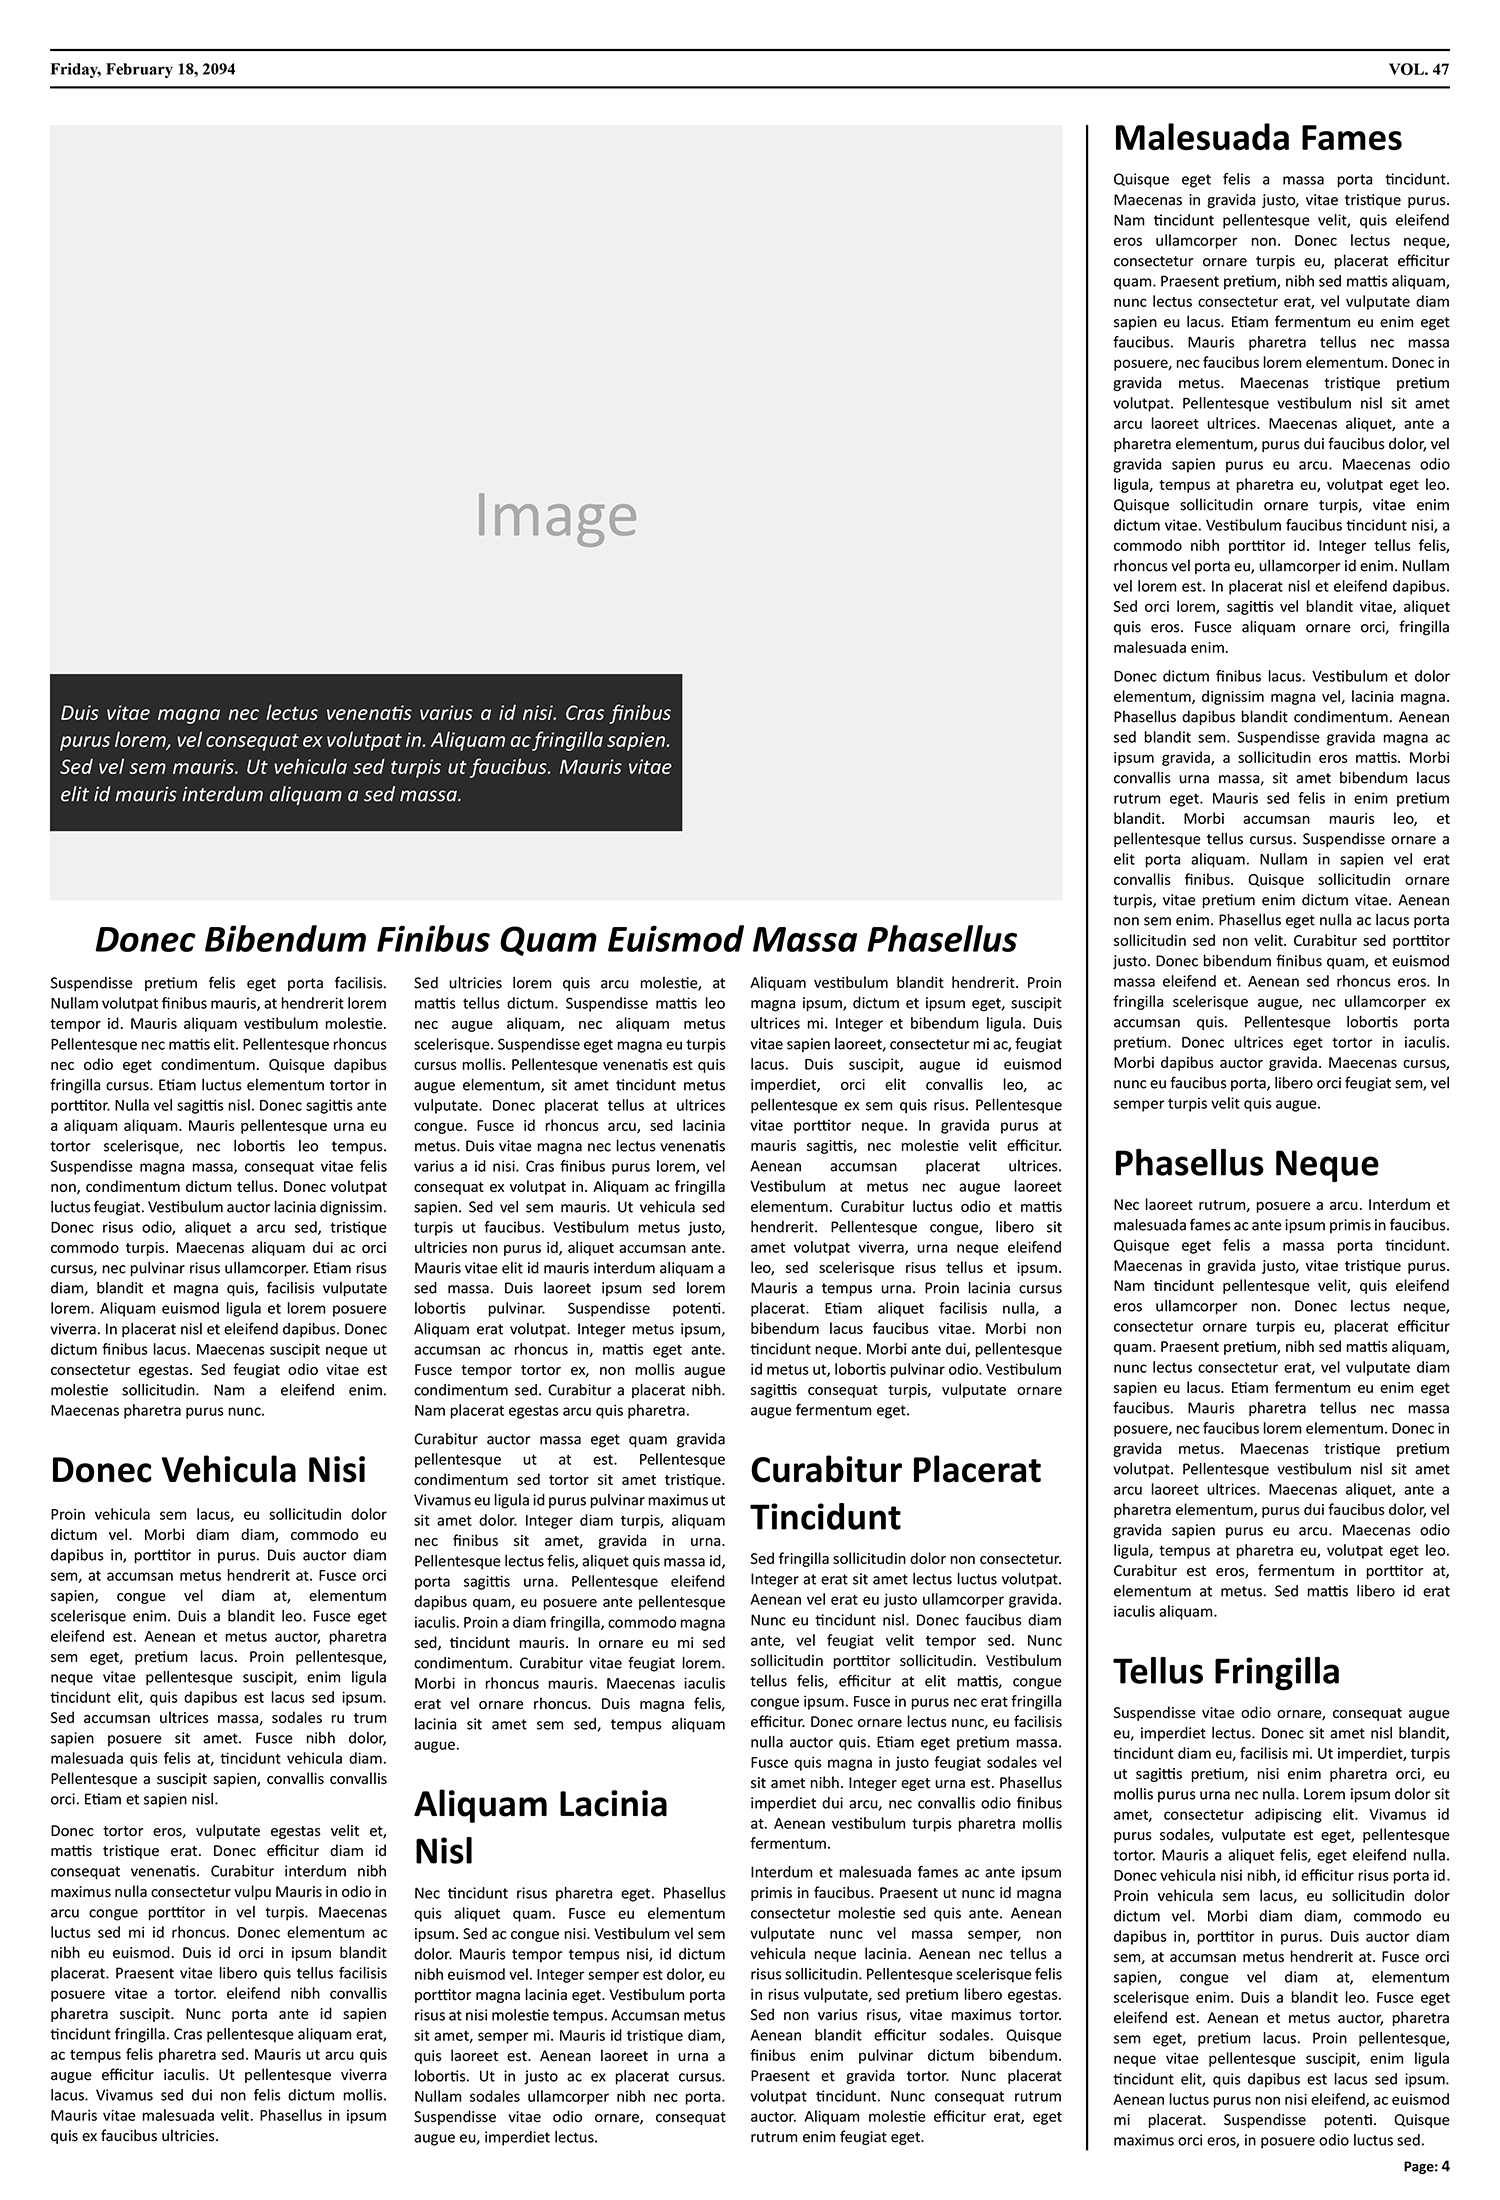 Blank Newspaper Article Page Template - Page 04